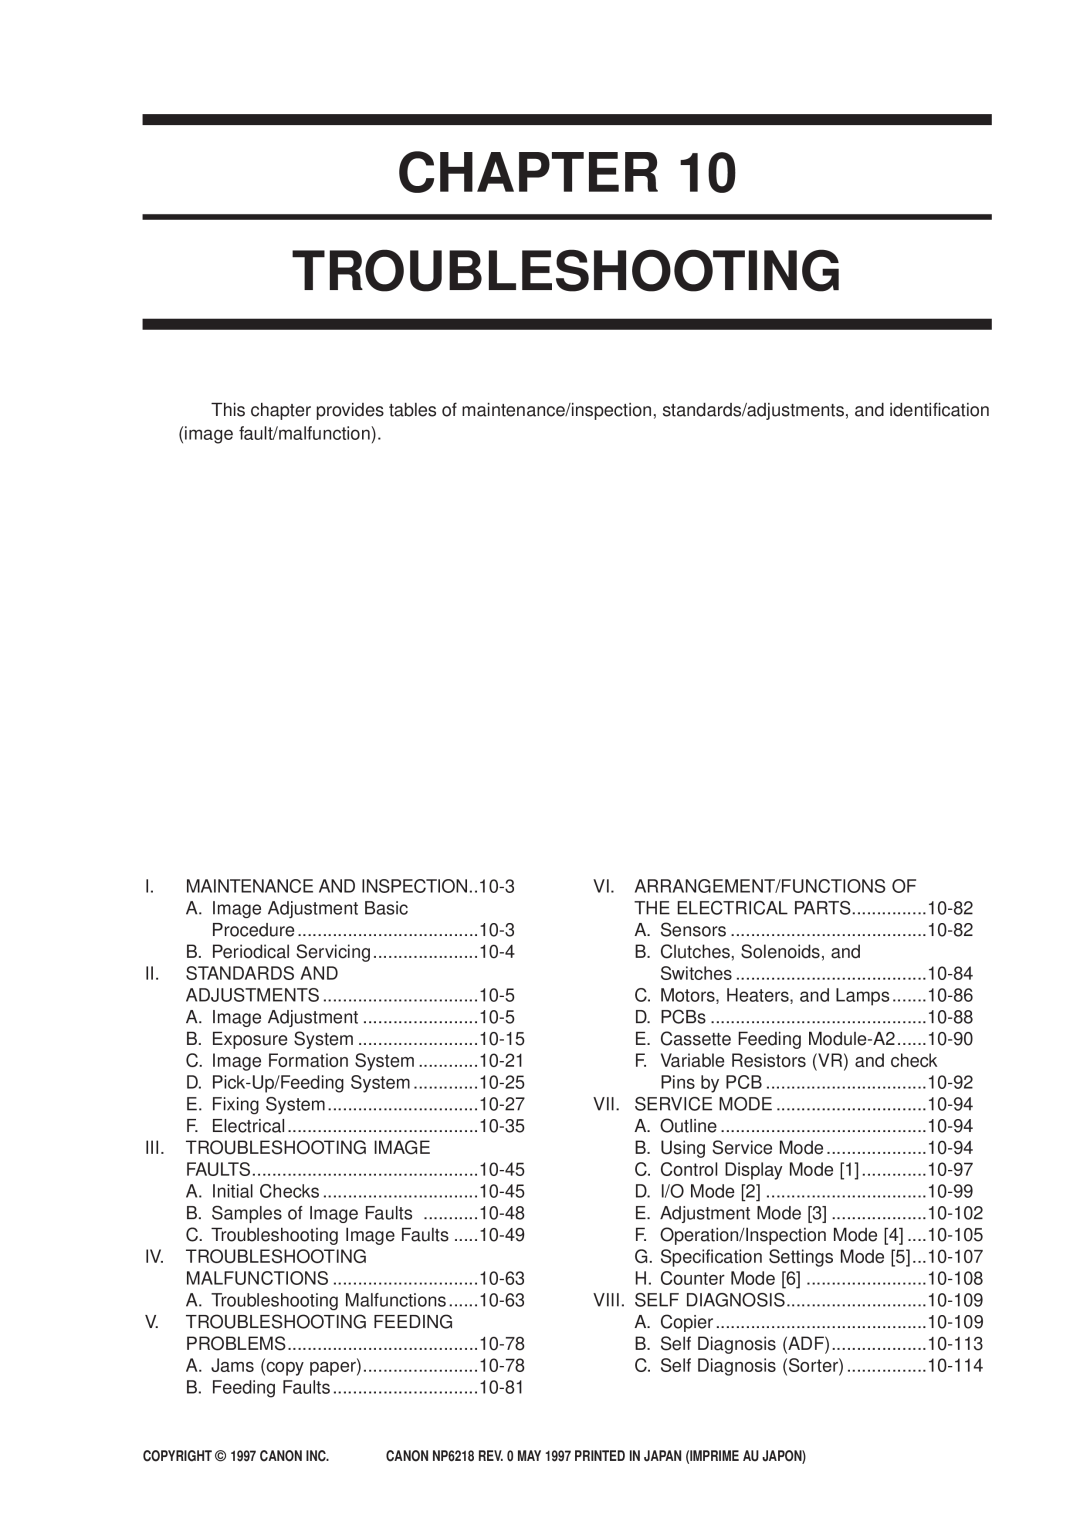 Canon NP6218, FY8-13EX-000 service manual Chapter Troubleshooting 